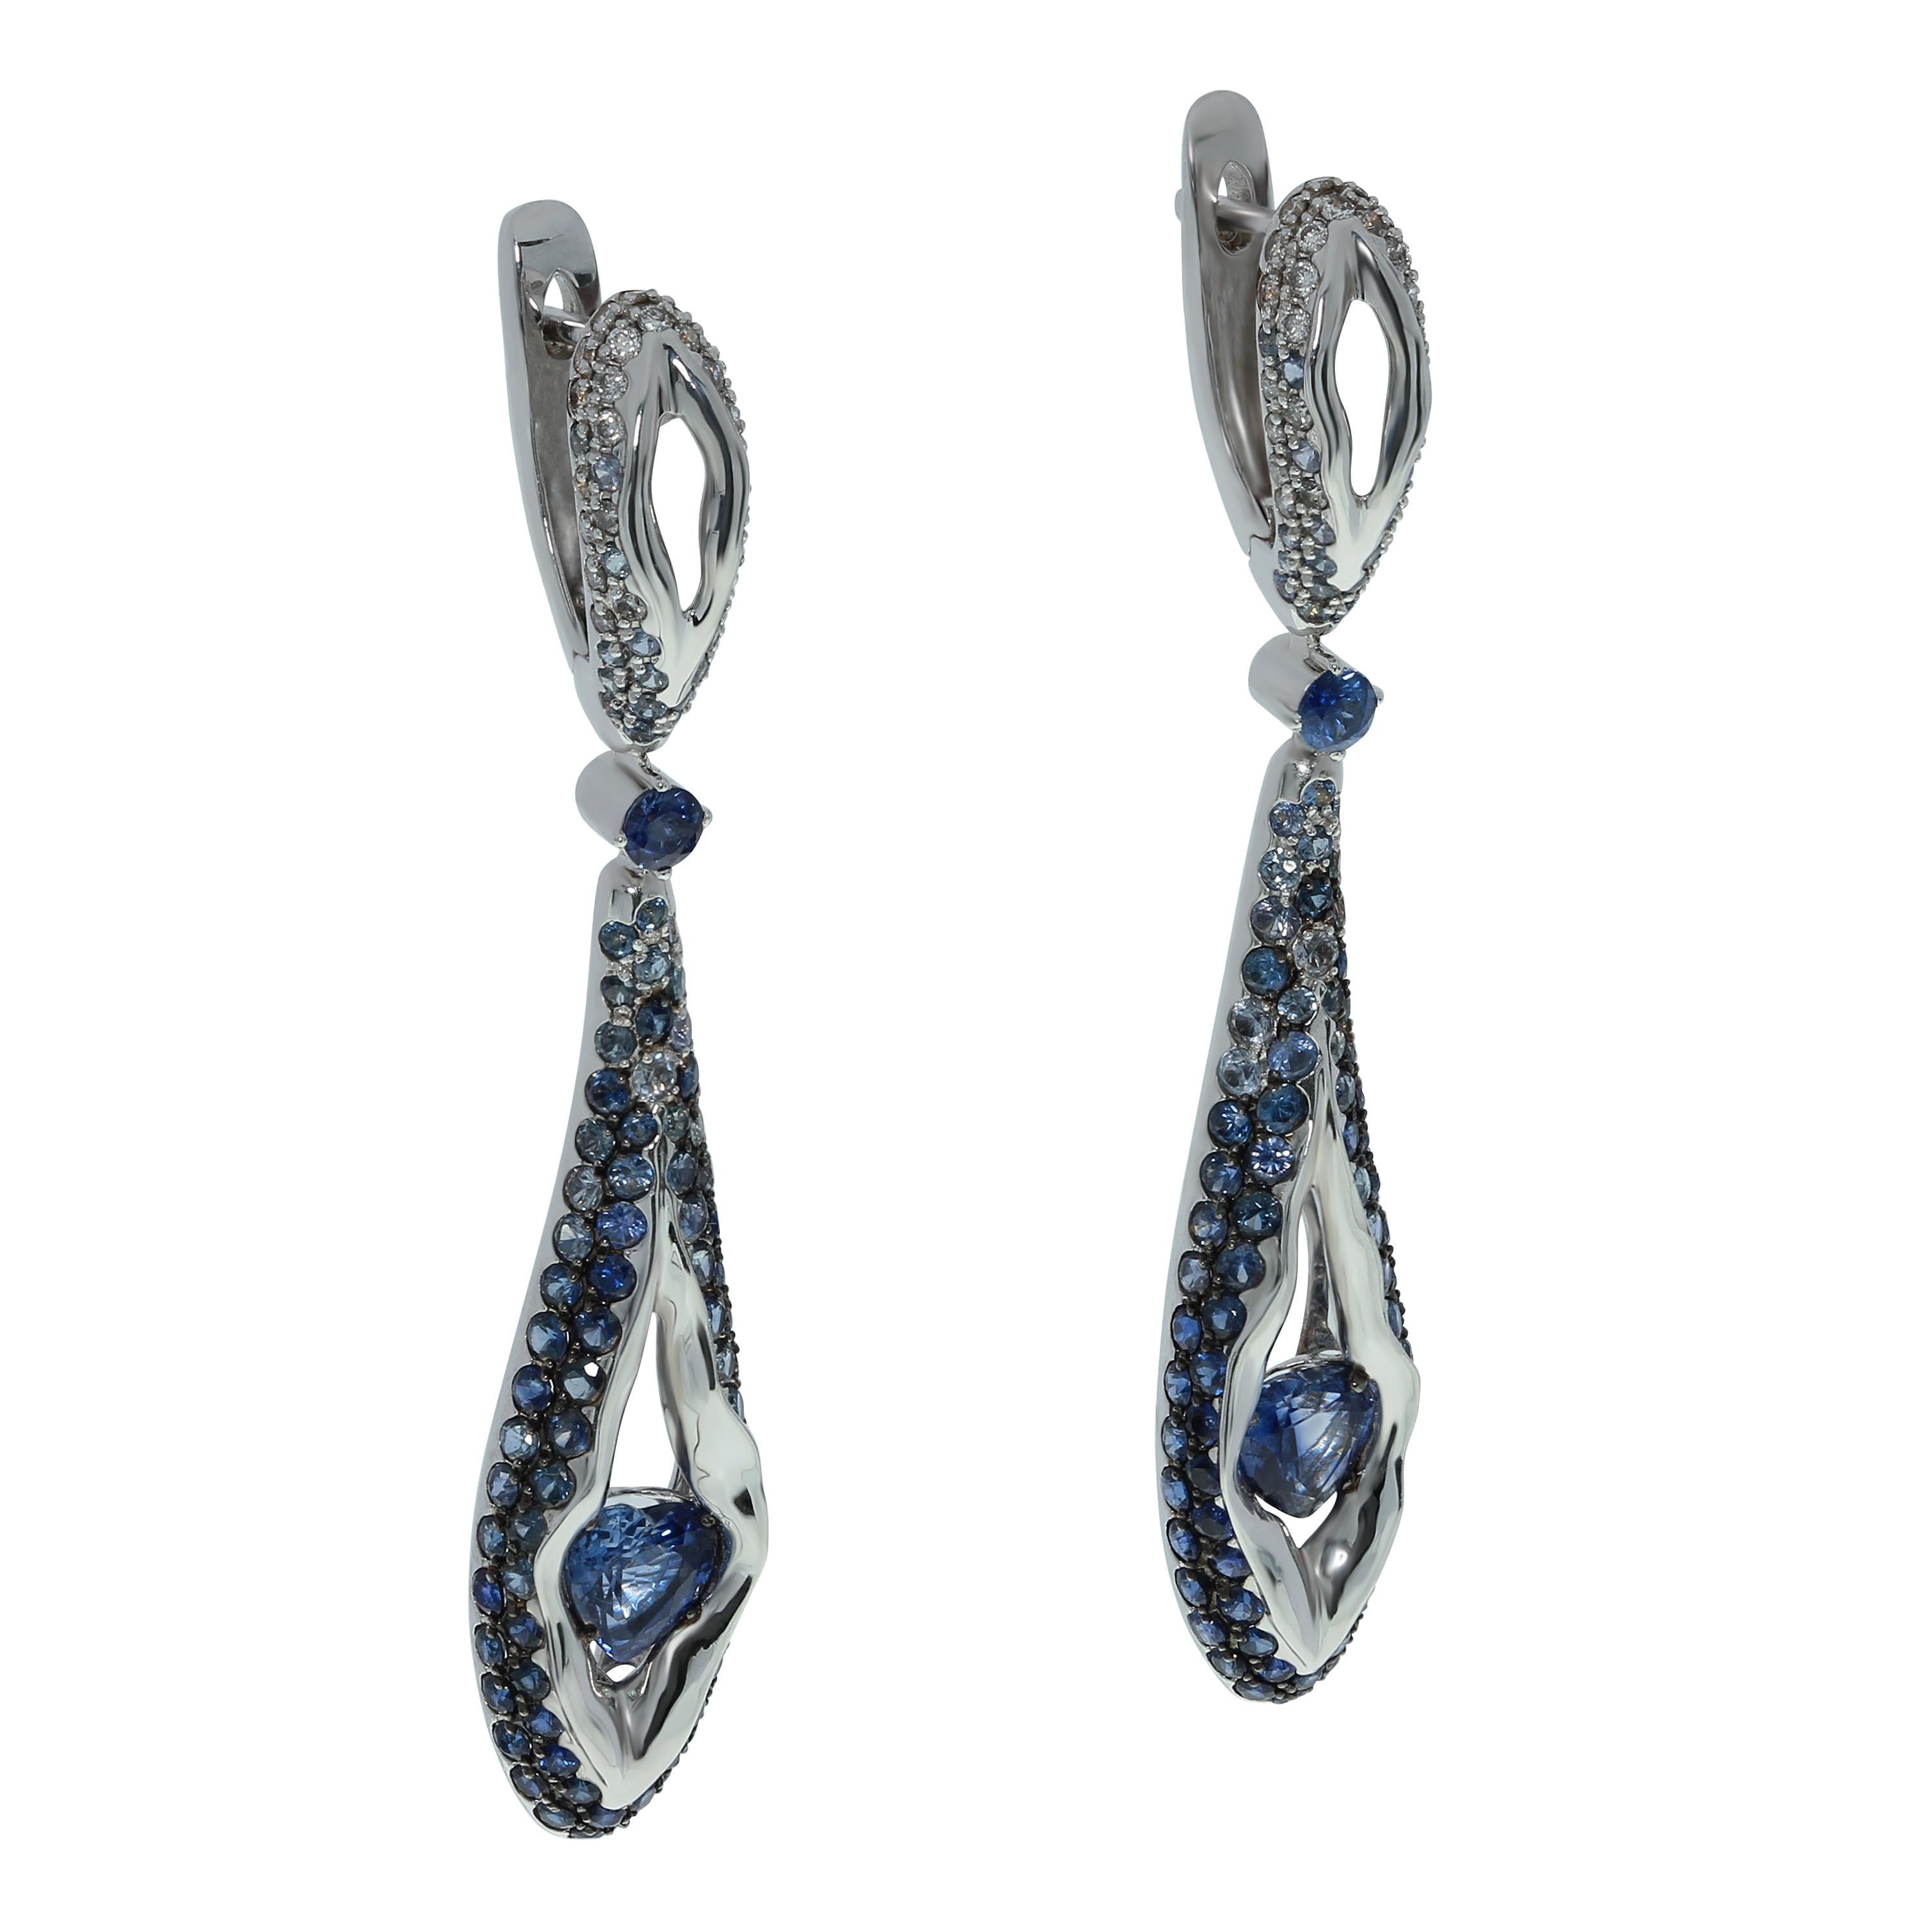 Sapphire Diamond 18 Karat White Gold HeartBeat Earrings
White 18K Gold looks like a rock cracked from strong blows, through which a Blue heart-shaped 1.21 Carat Sapphires makes its way out. From the central stone there are cracks in which is